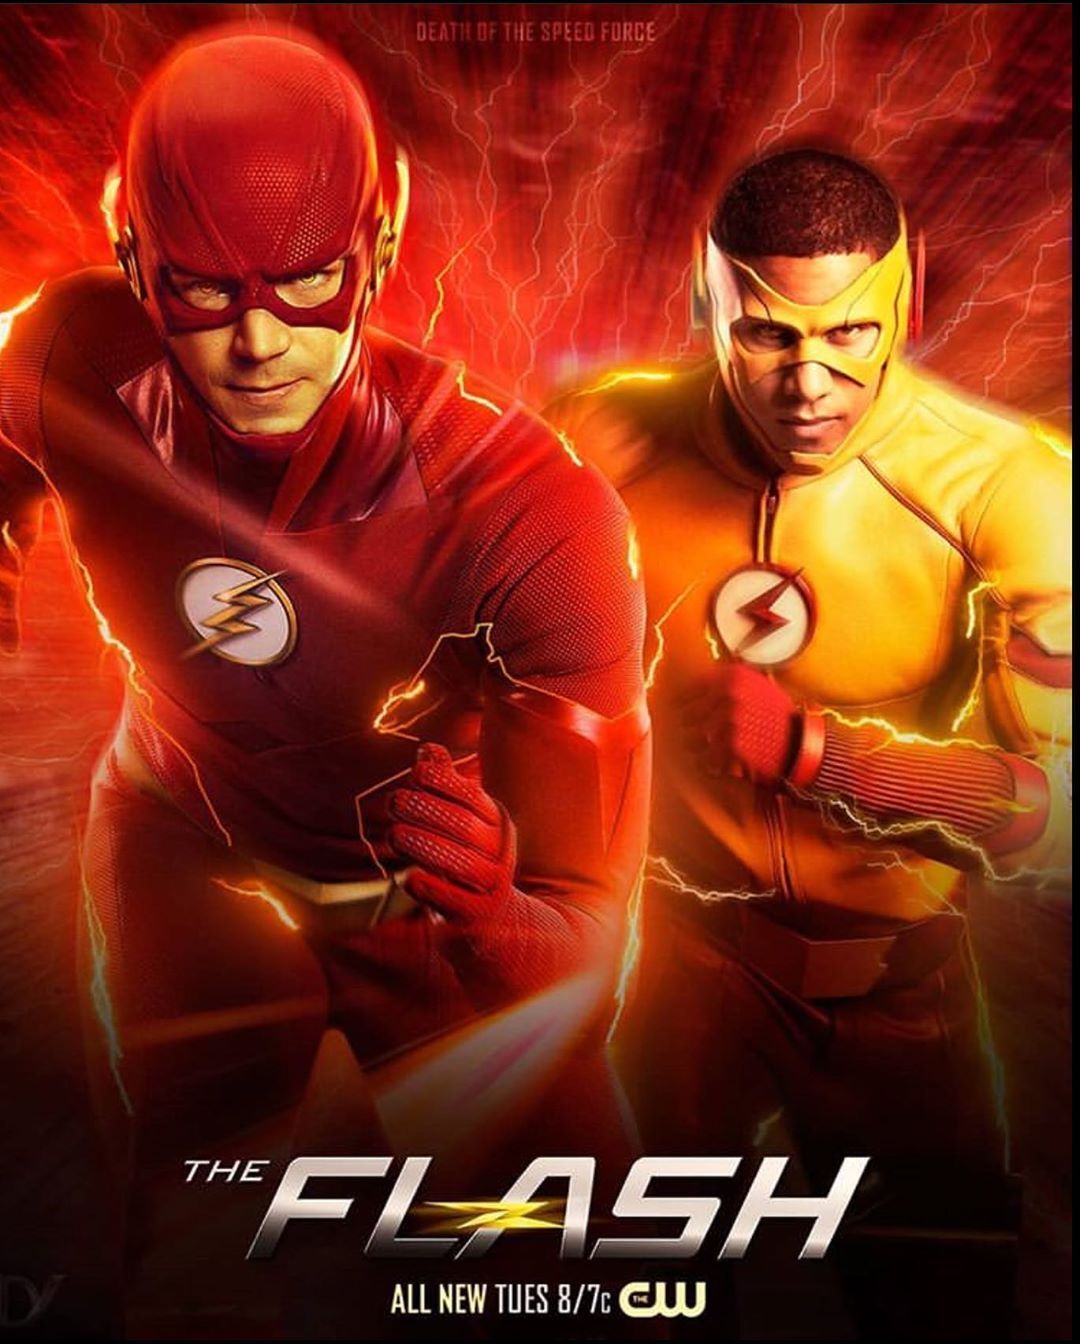 Nick Halter ⚡️ on Instagram: “So excited for tomorrow, we haven't seen wally since s5 ep 1 Credit. Kid flash, Flash tv series, Flash wallpaper